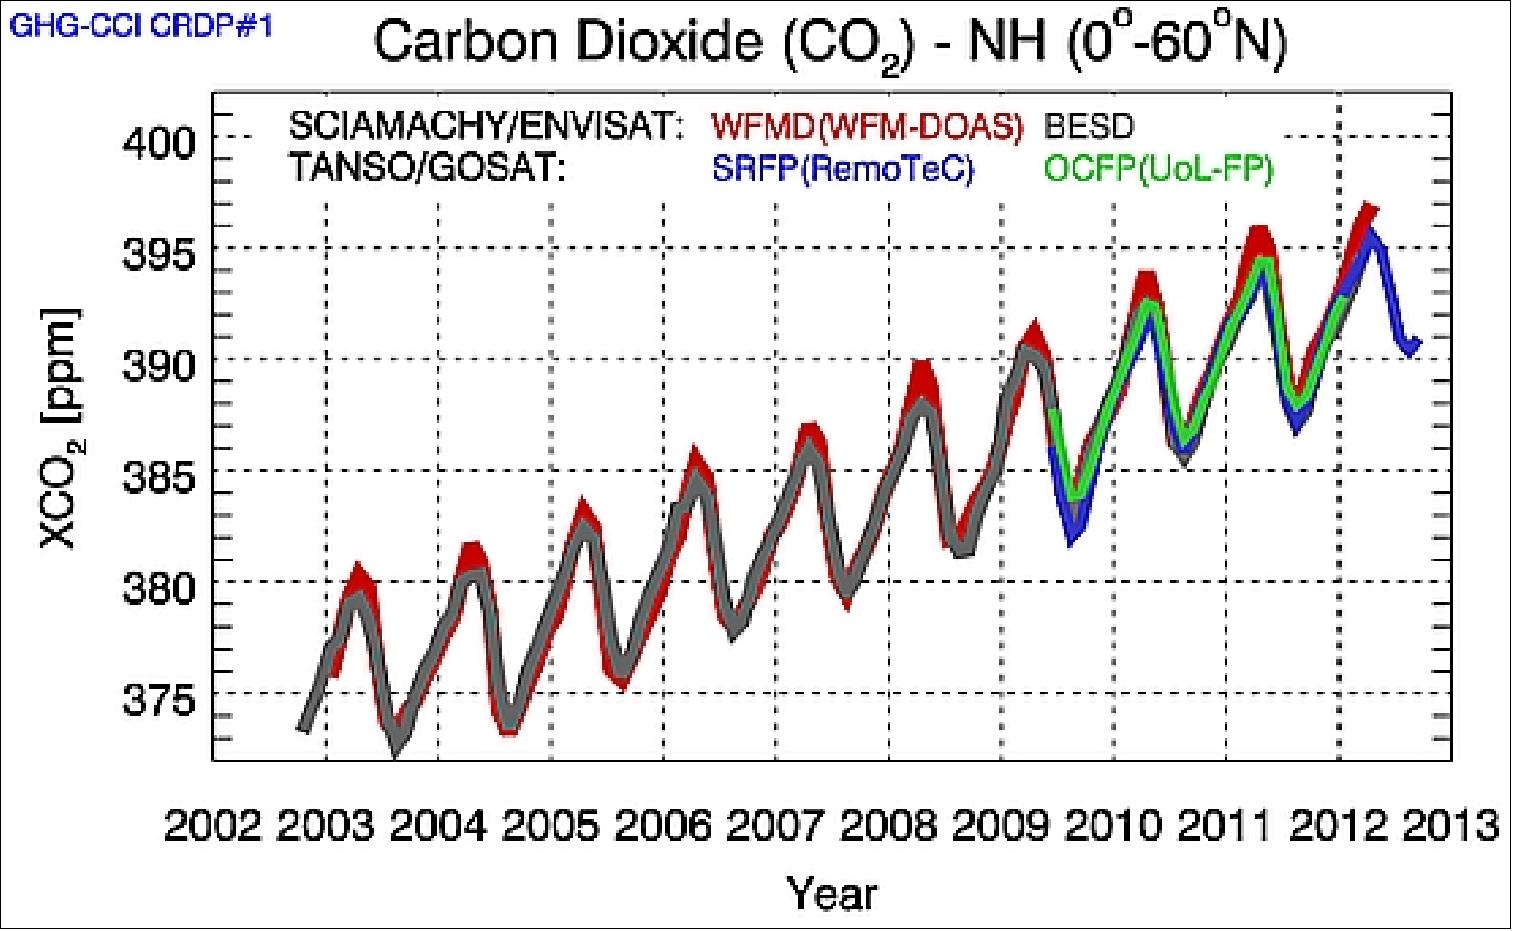 Figure 17: Carbon dioxide levels in the period 2002-2012 retrieved from SCIAMACHY on Envisat and TANSO on GOSAT (image credit: ESA)